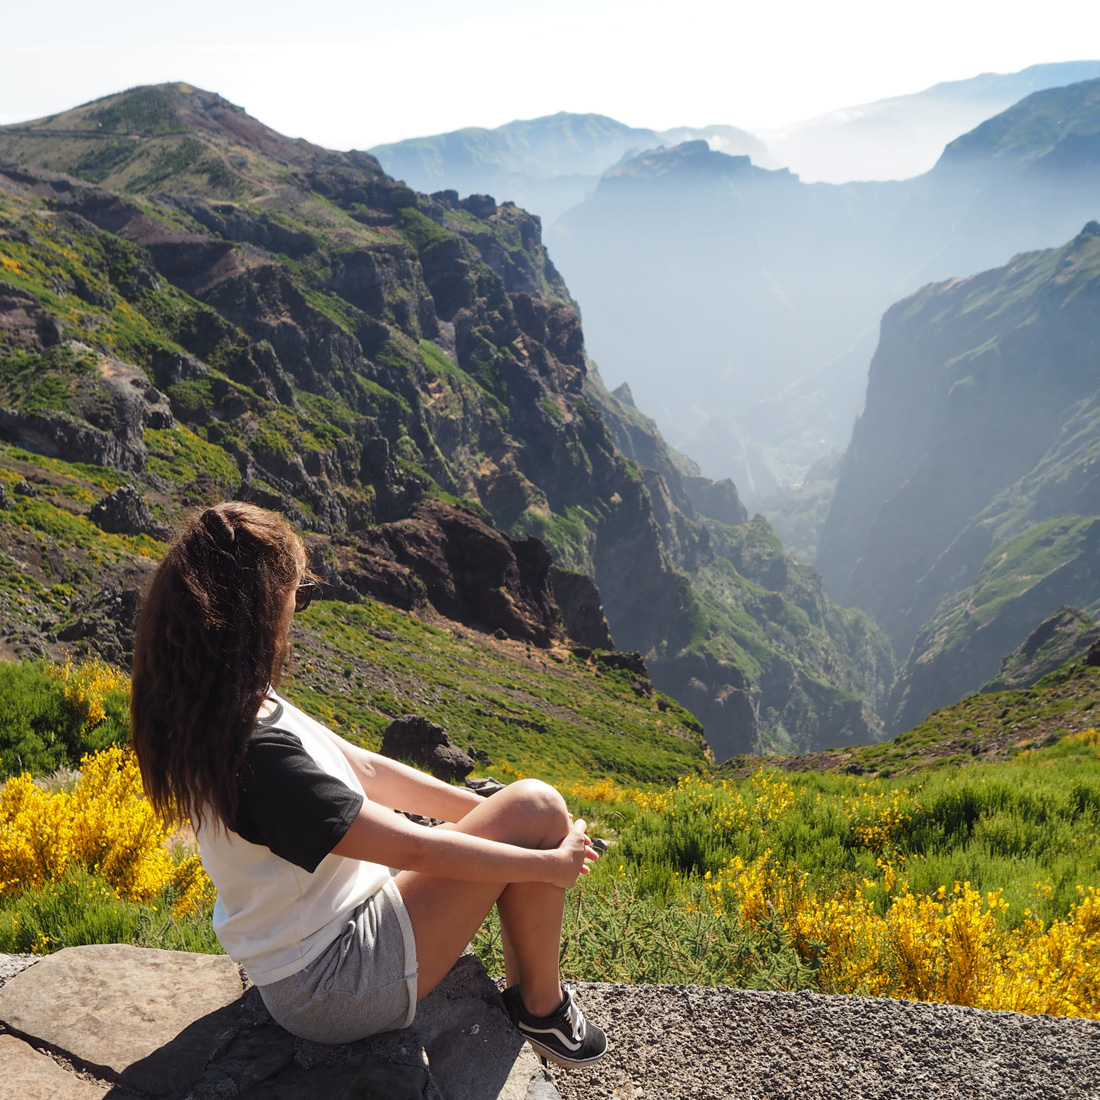 Top 10 things to do in Madeira Island